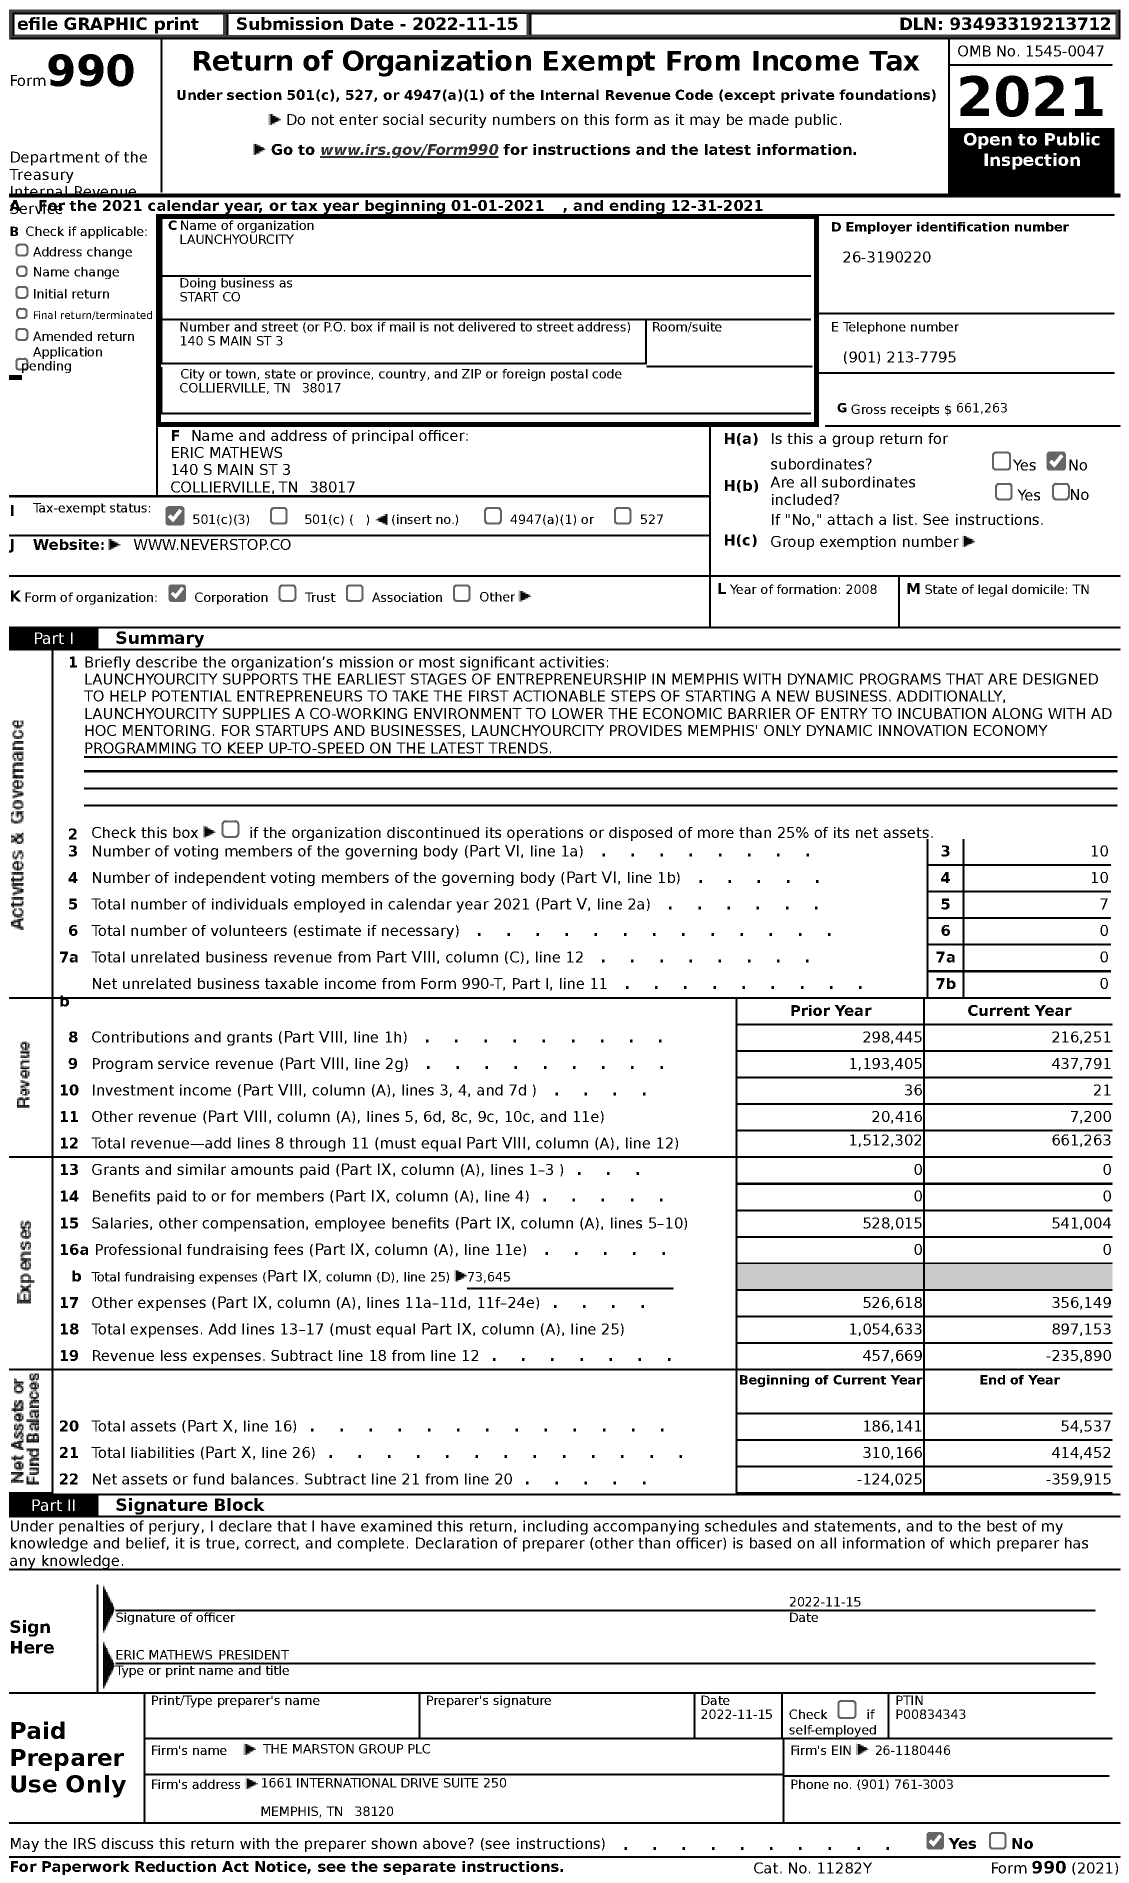 Image of first page of 2021 Form 990 for Start / Launchyourcity